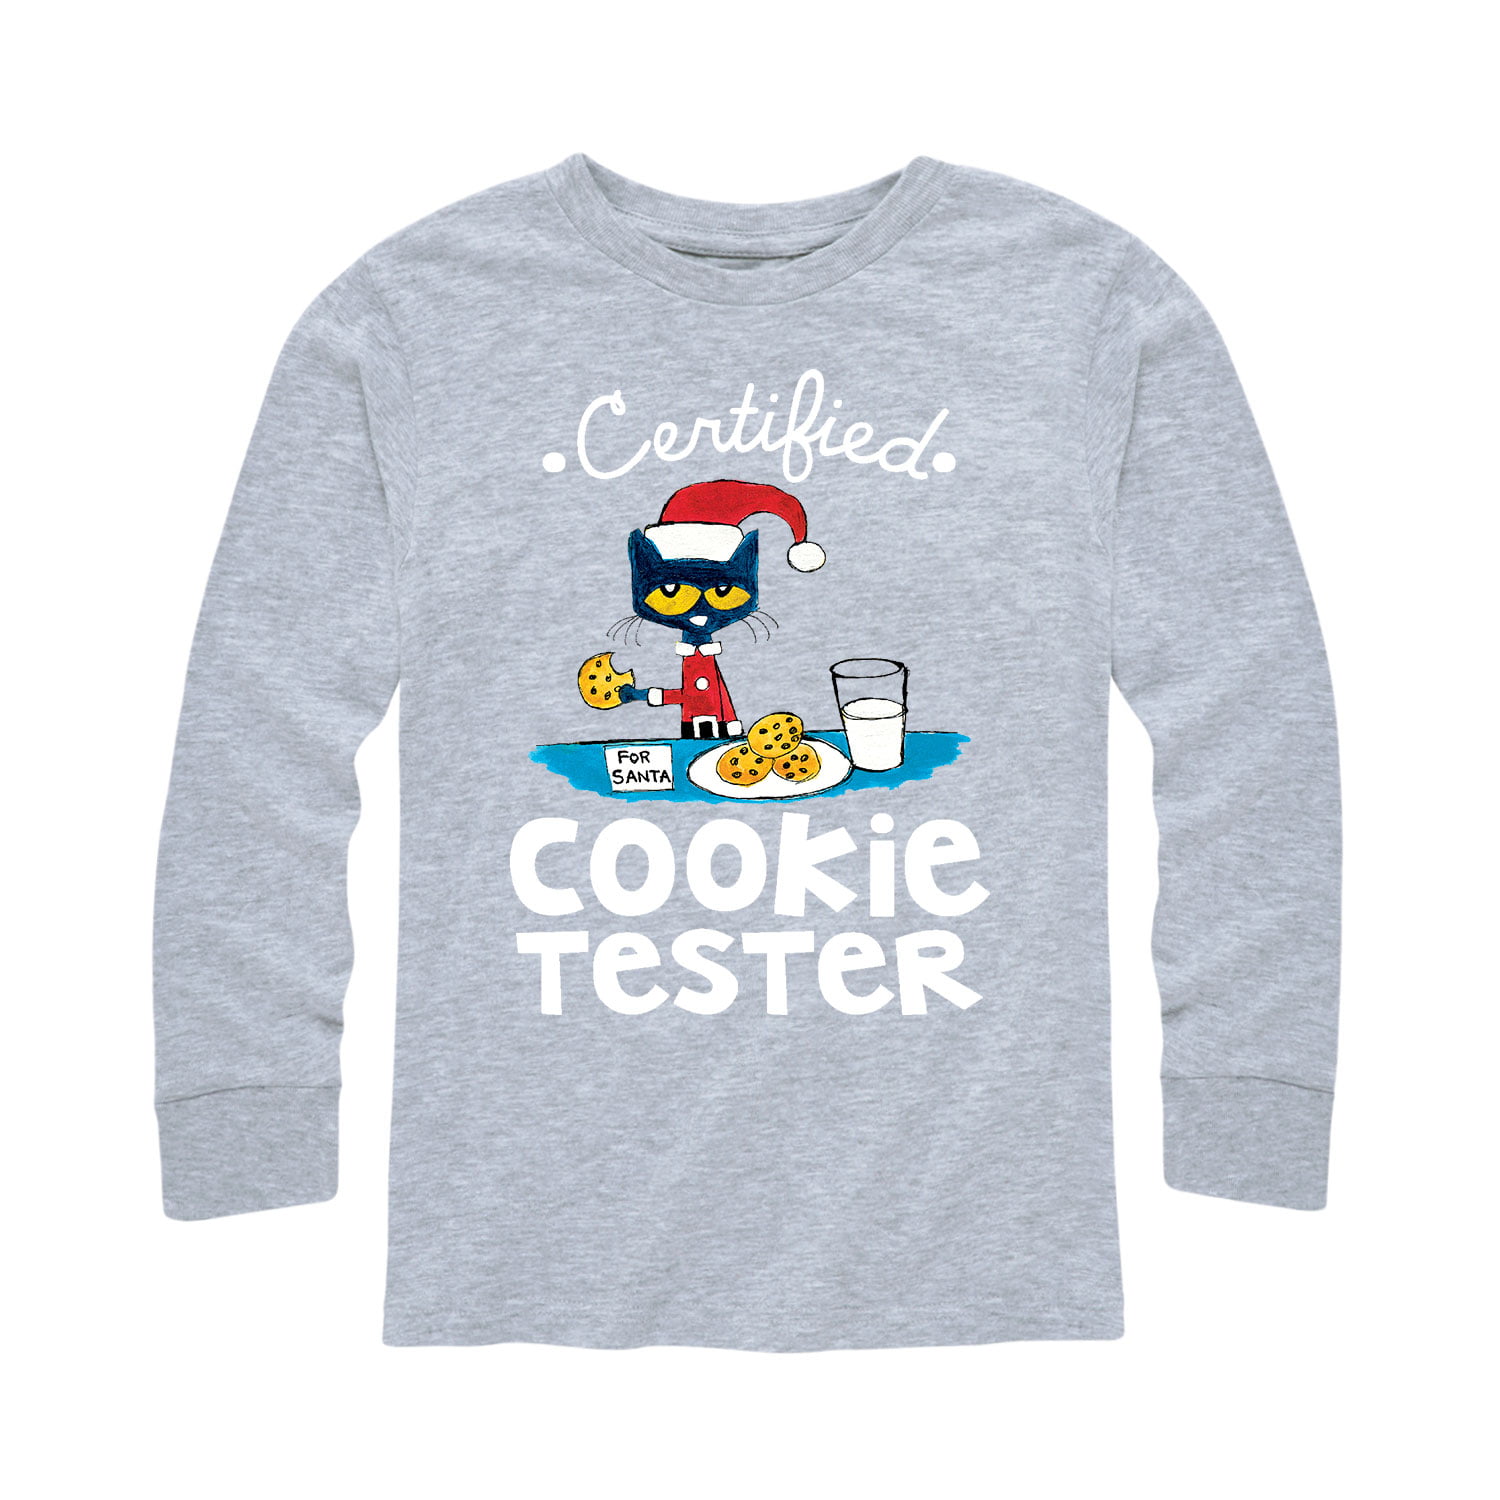 Pete the Cat Certified Cookie Tester Toddler Long Sleeve Tee 